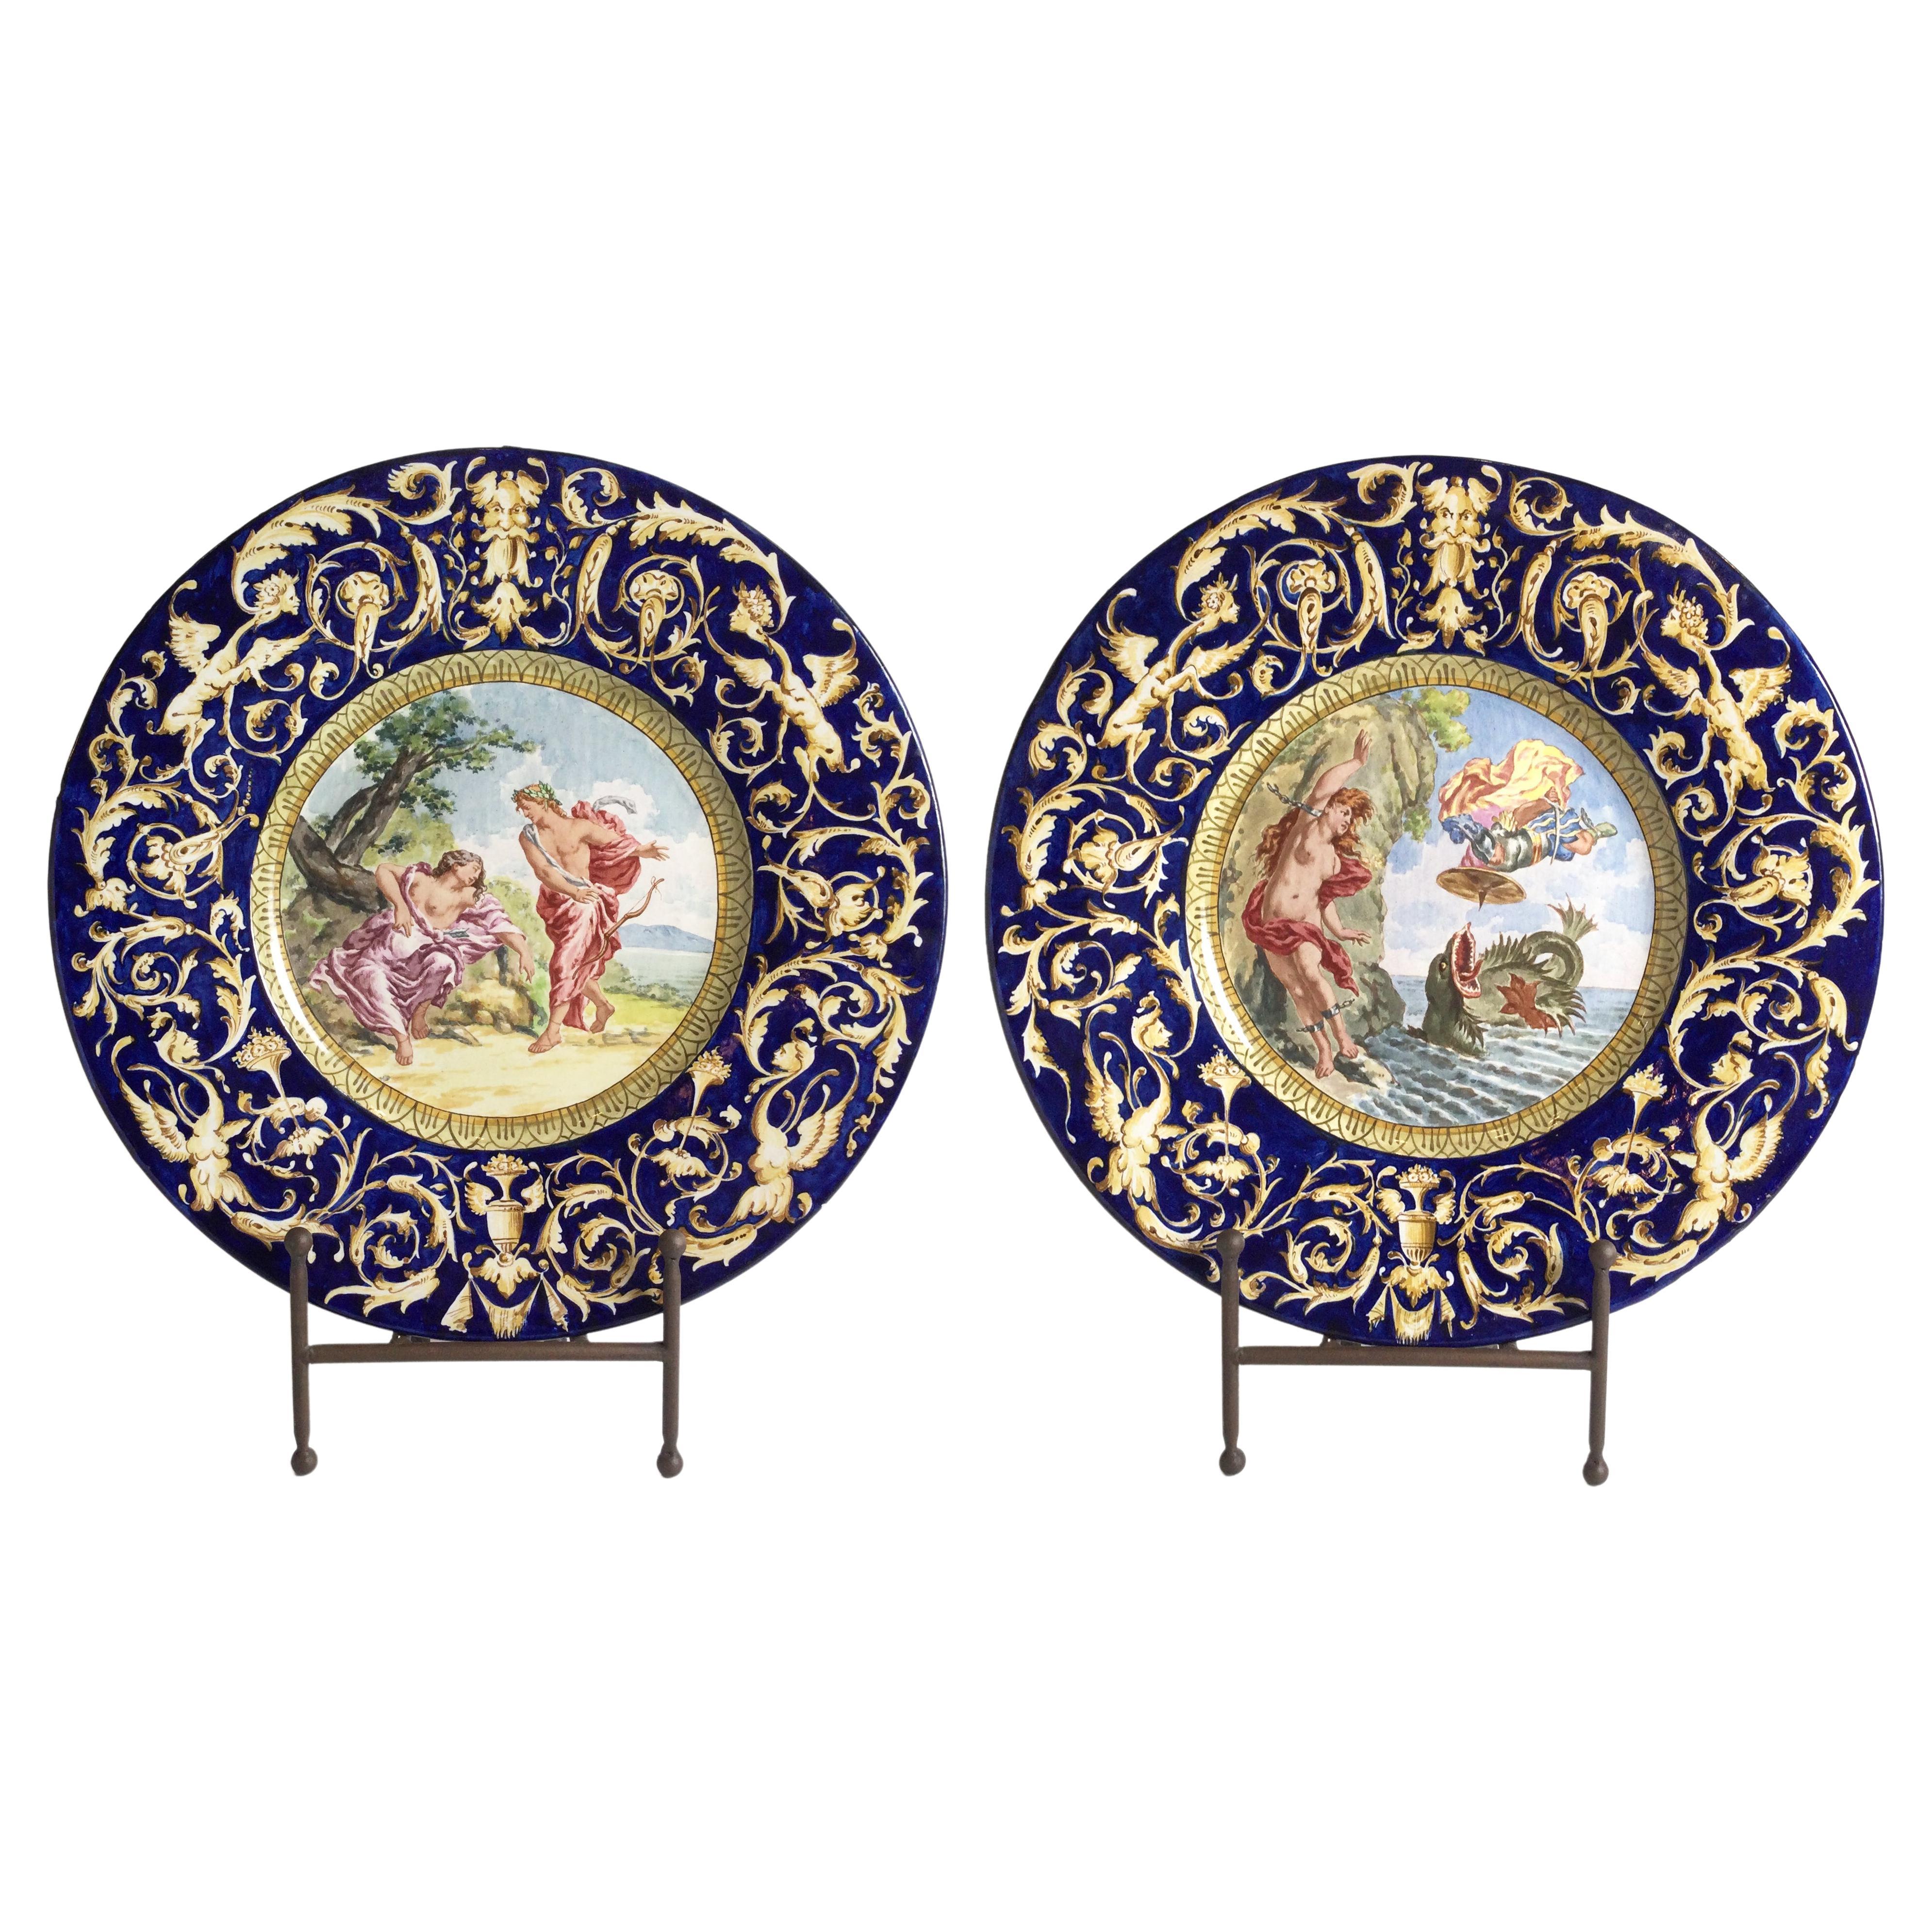 Large Pair of 19th Century Allegorical Italian Faience Hanging Wall Charger